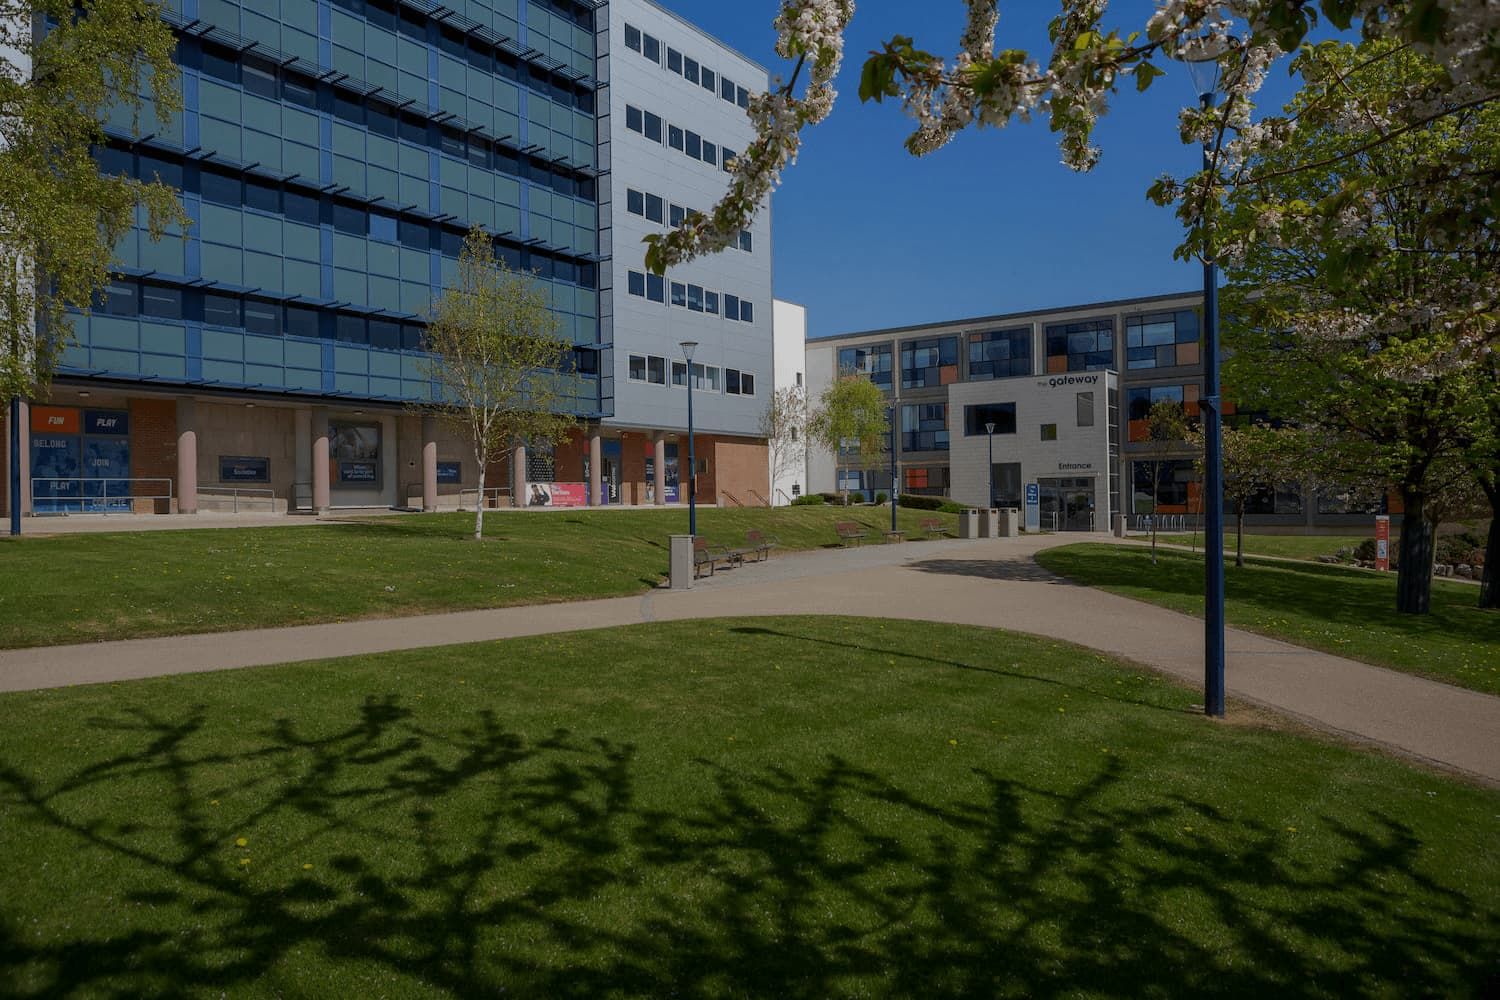 An empty city campus, overlooking grassy areas on a sunny day